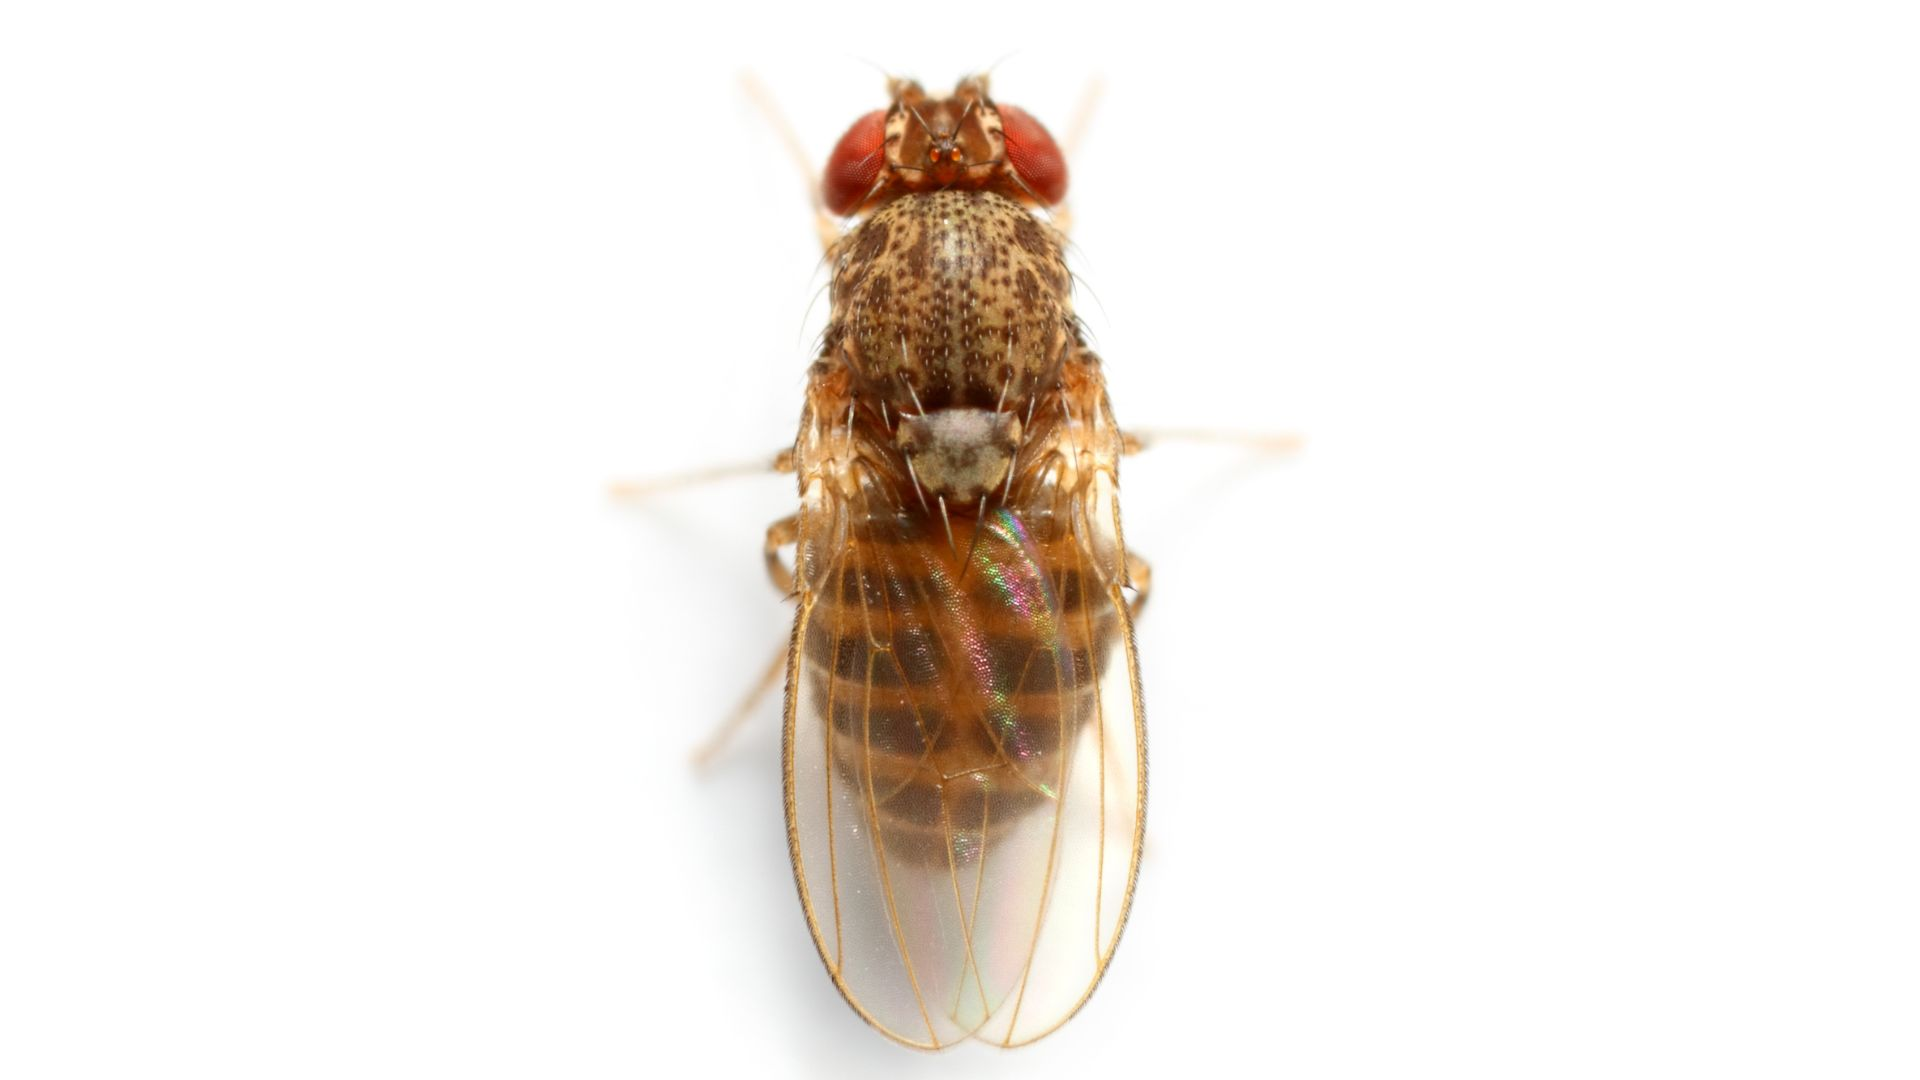 A top-down view of a fruit fly.